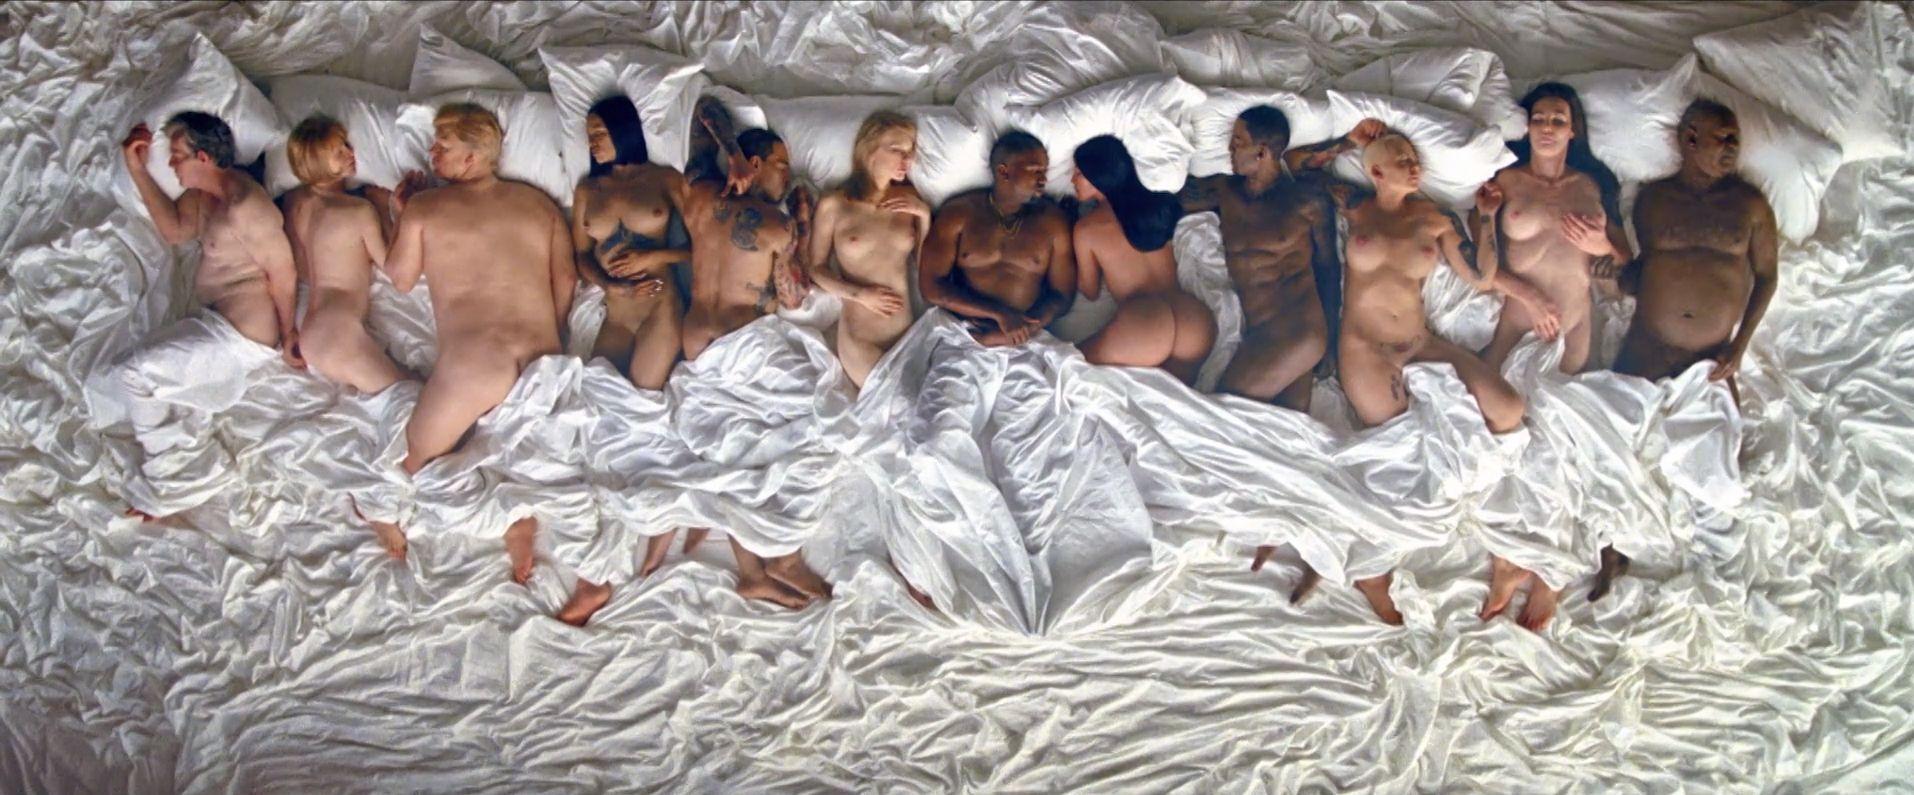 Kanye West Famous music video Painter who inspired it lambastes Lena Dunhams critique Making art amenable to a certain political class or agenda would be a disaster The Independent The Independent